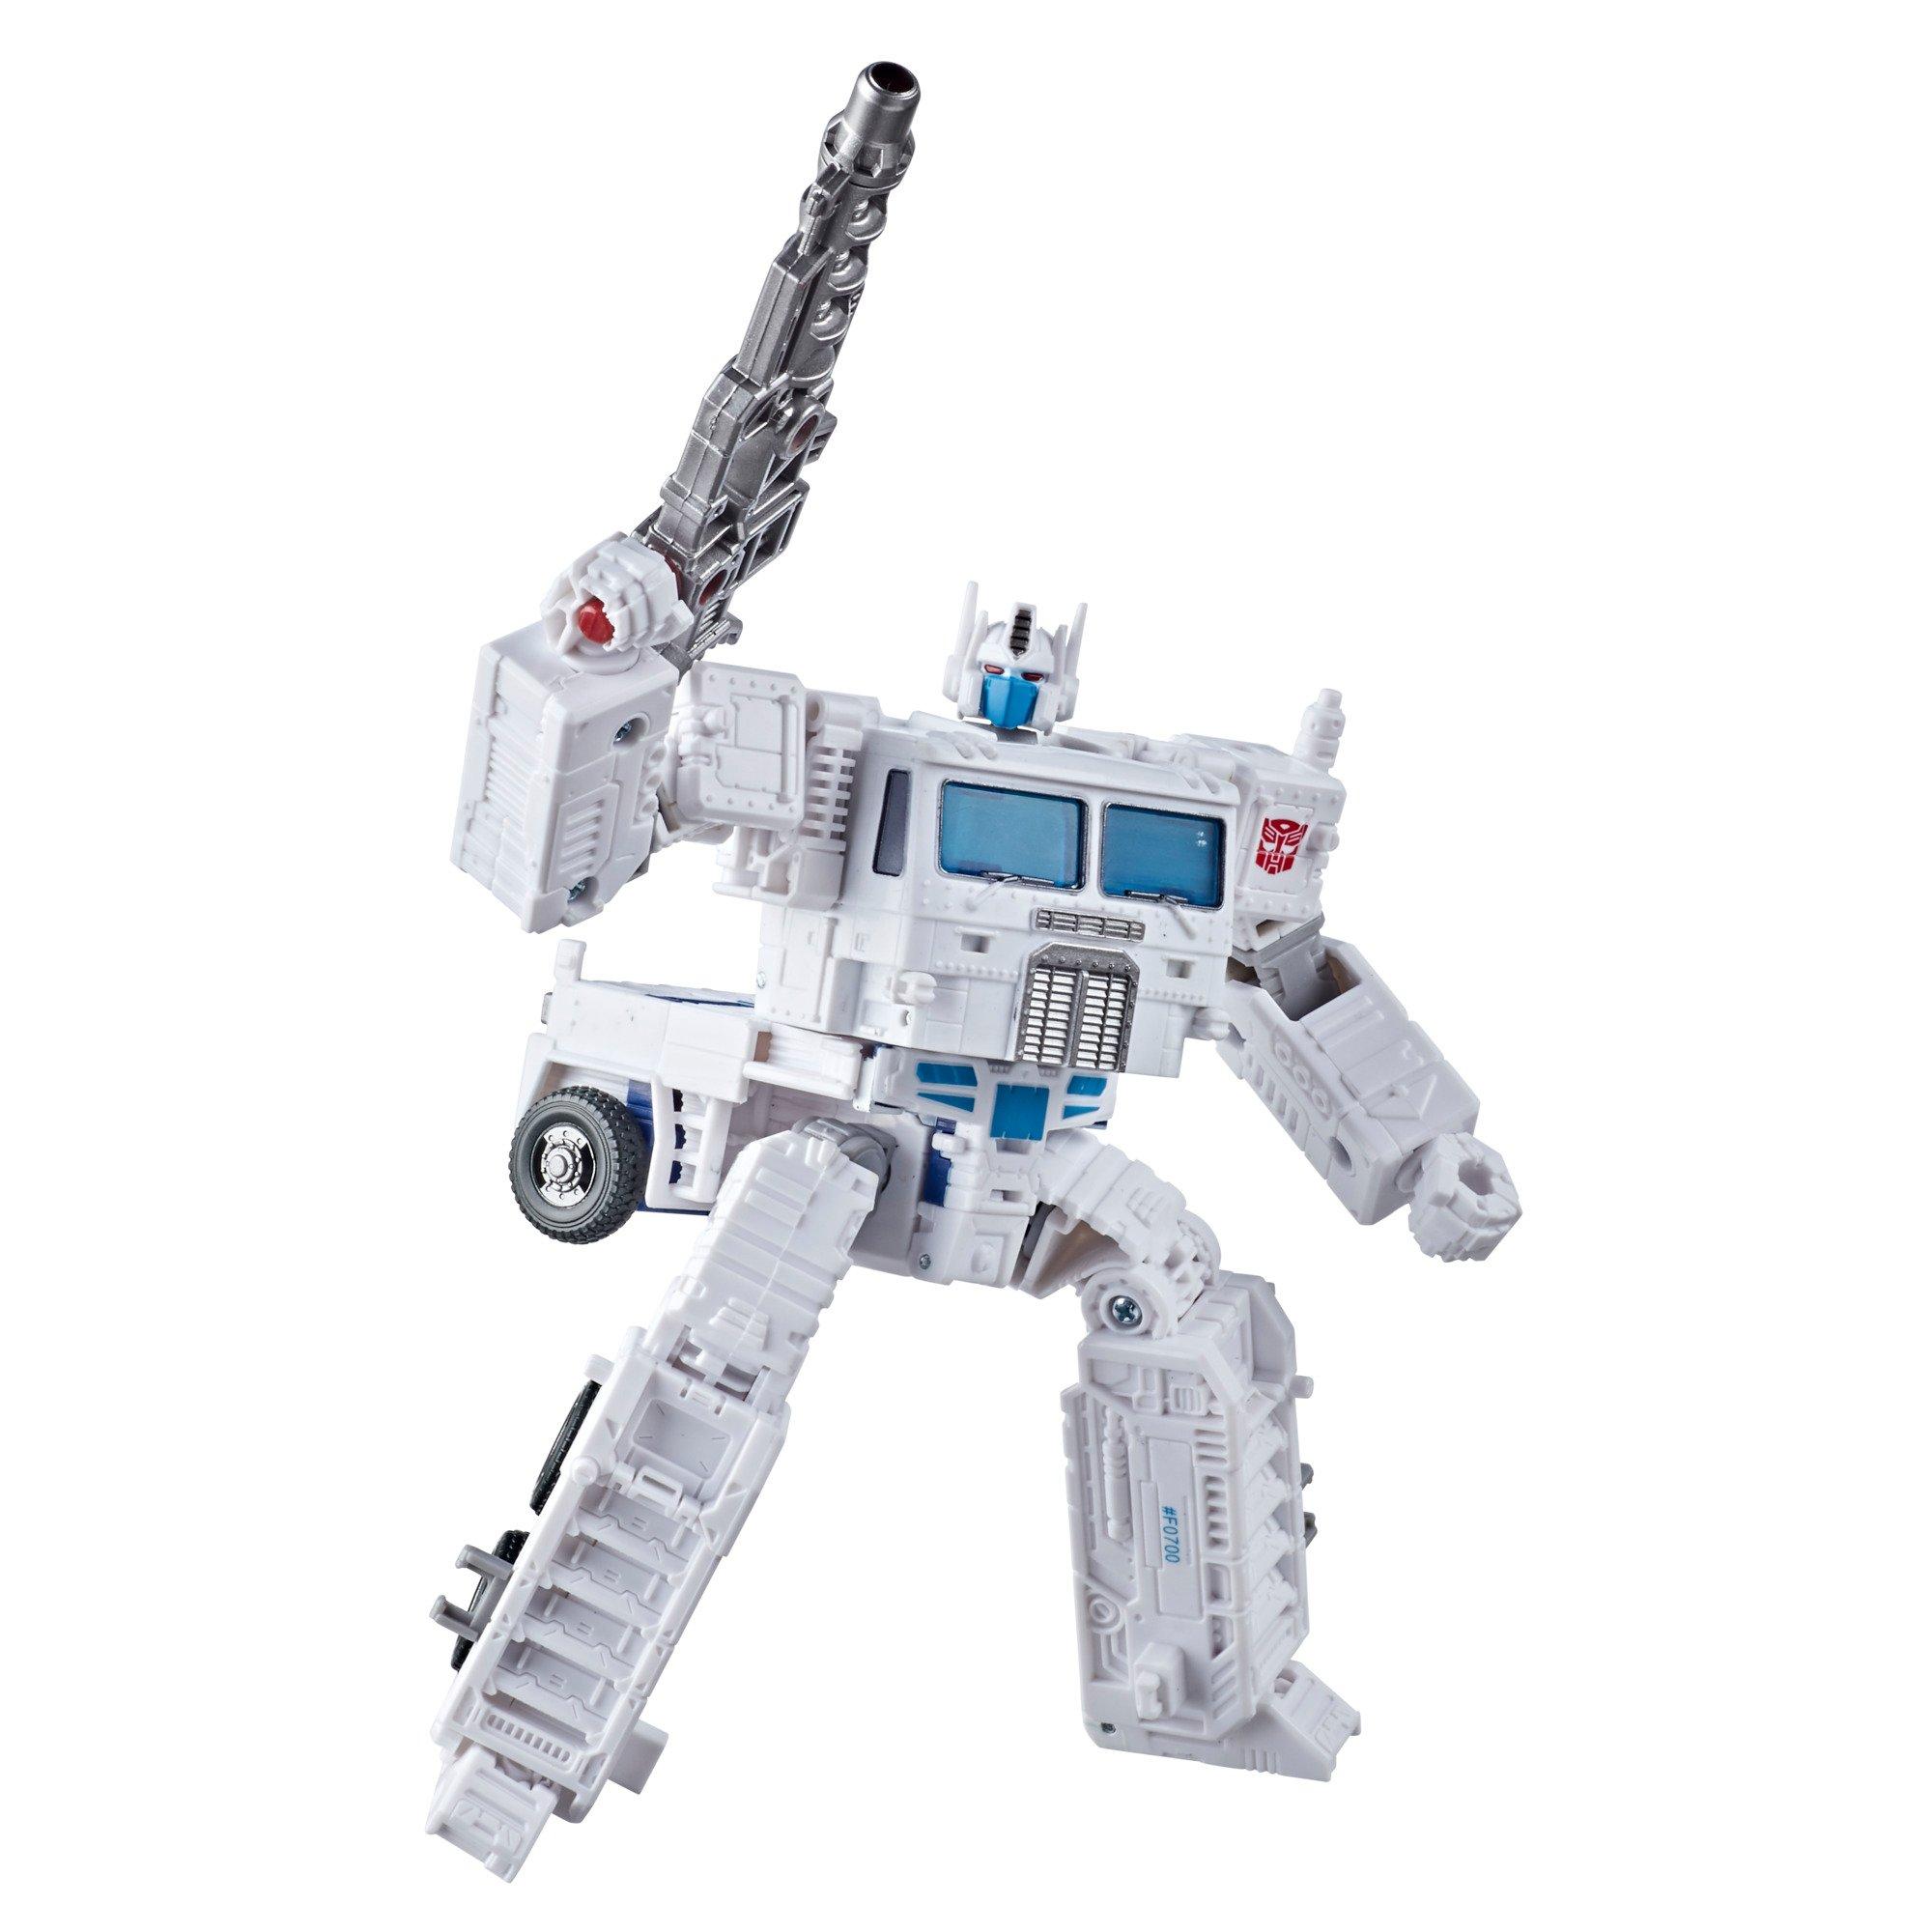 Transformers War for Cybertron Siege Leader Class ULTRA MAGNUS Figure by Hasbro 